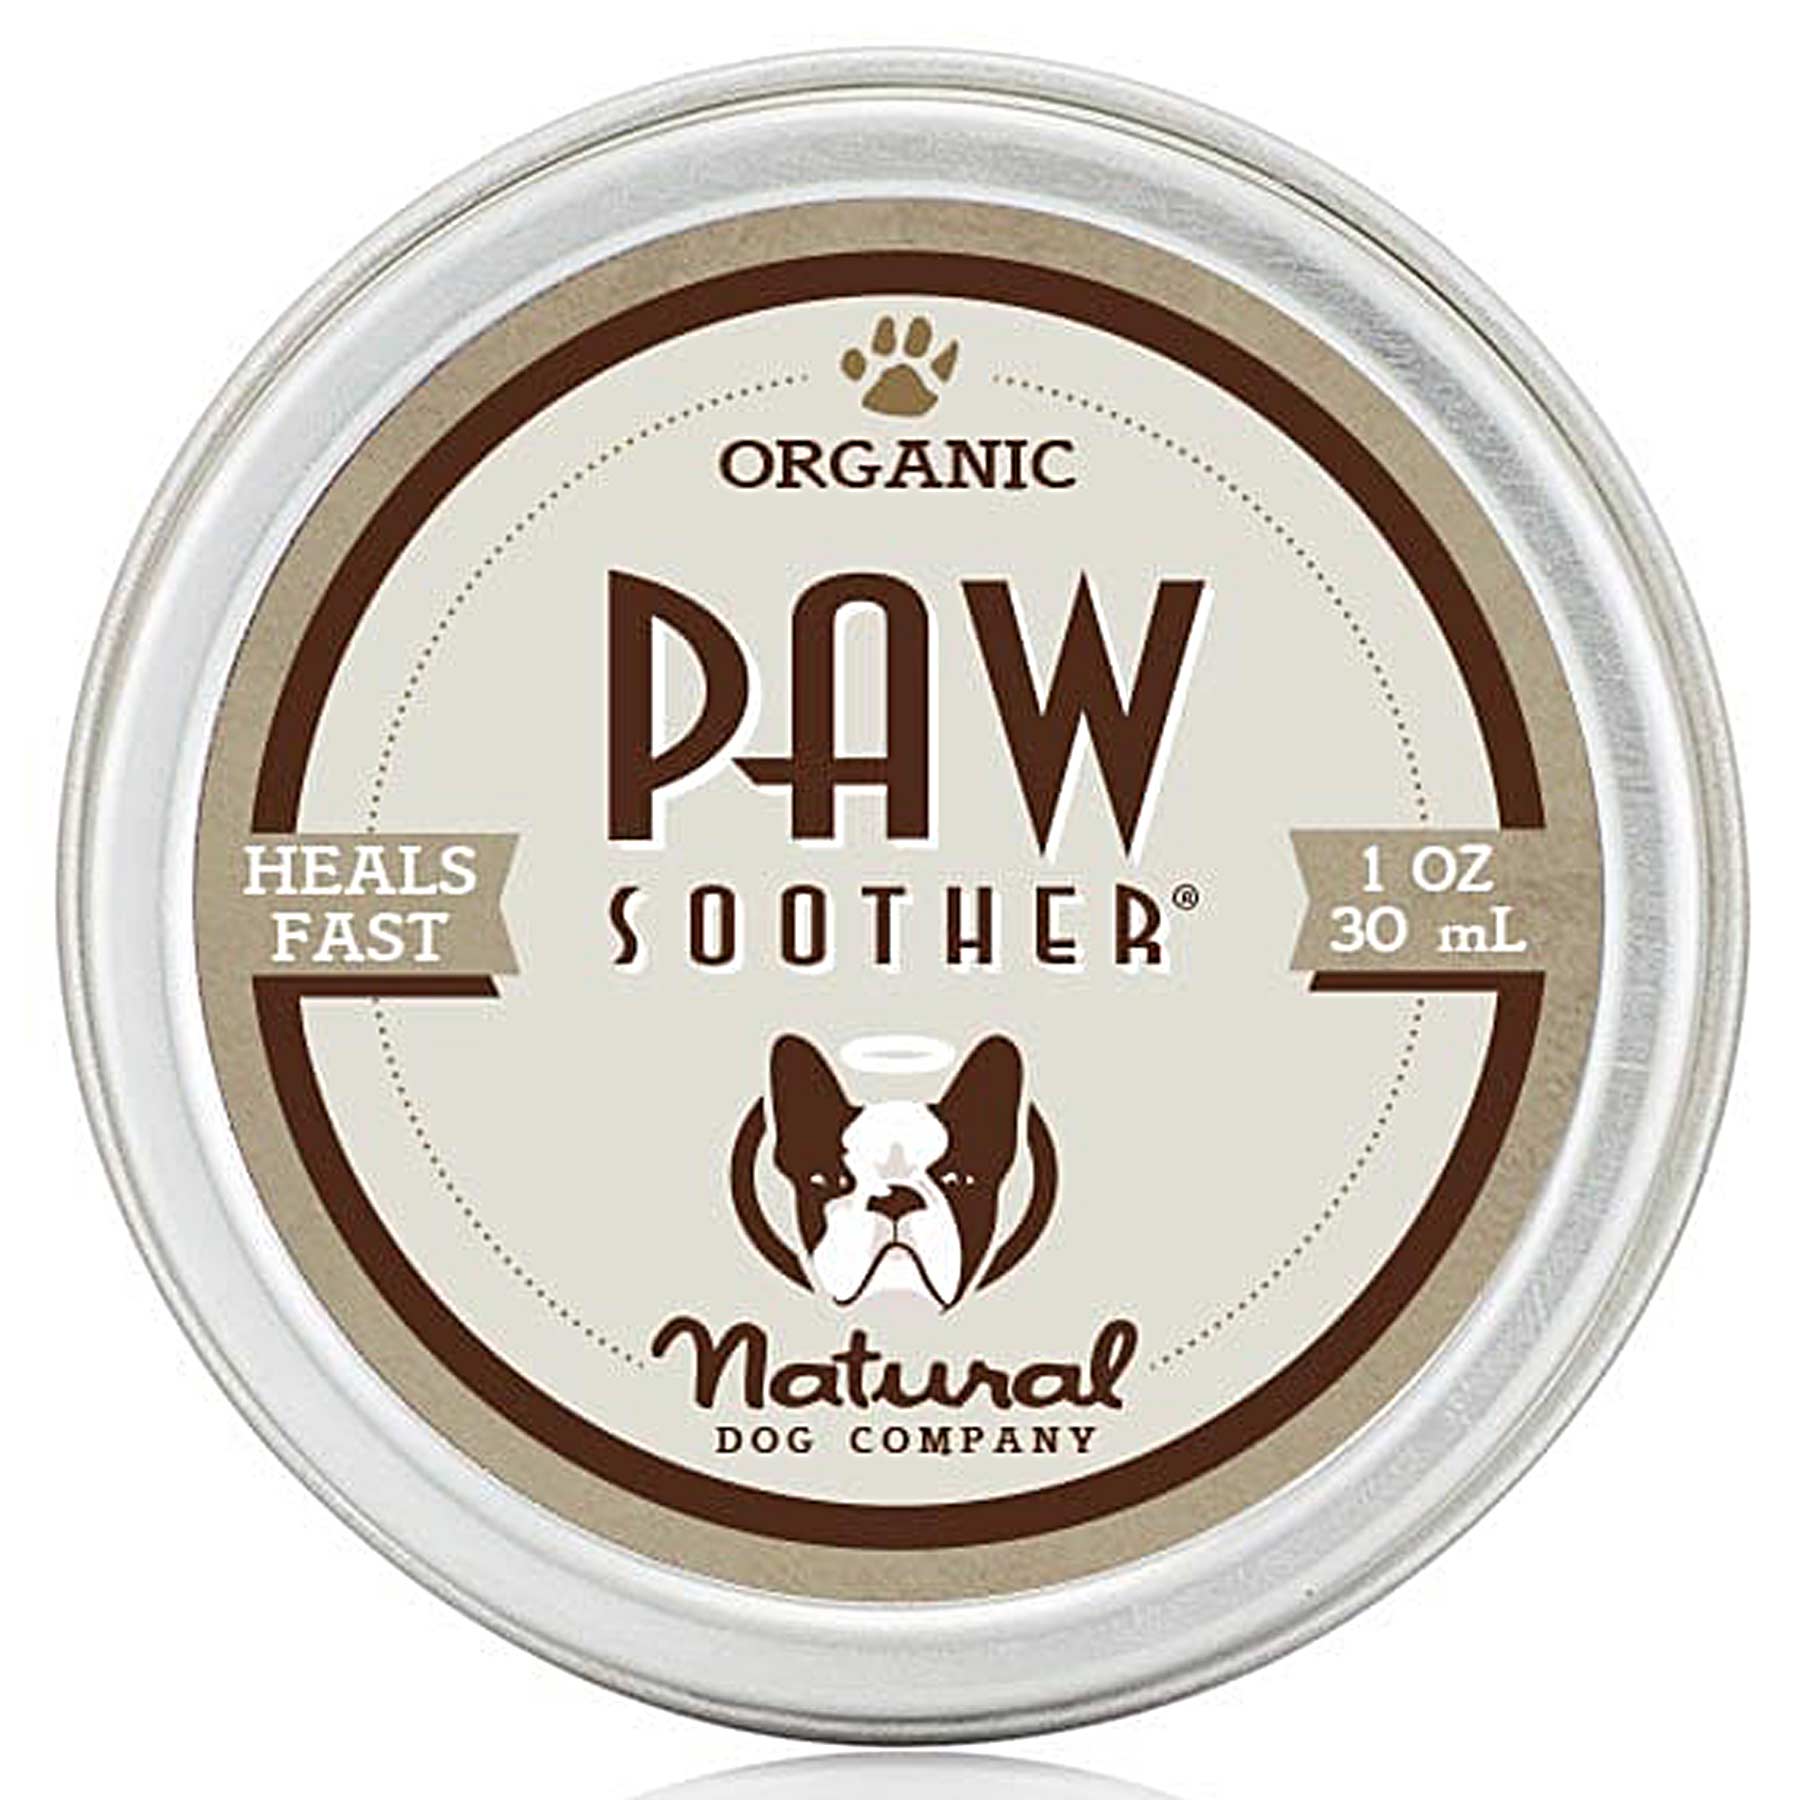 Natural Dog Company Paw Soother Organic Healing Balm